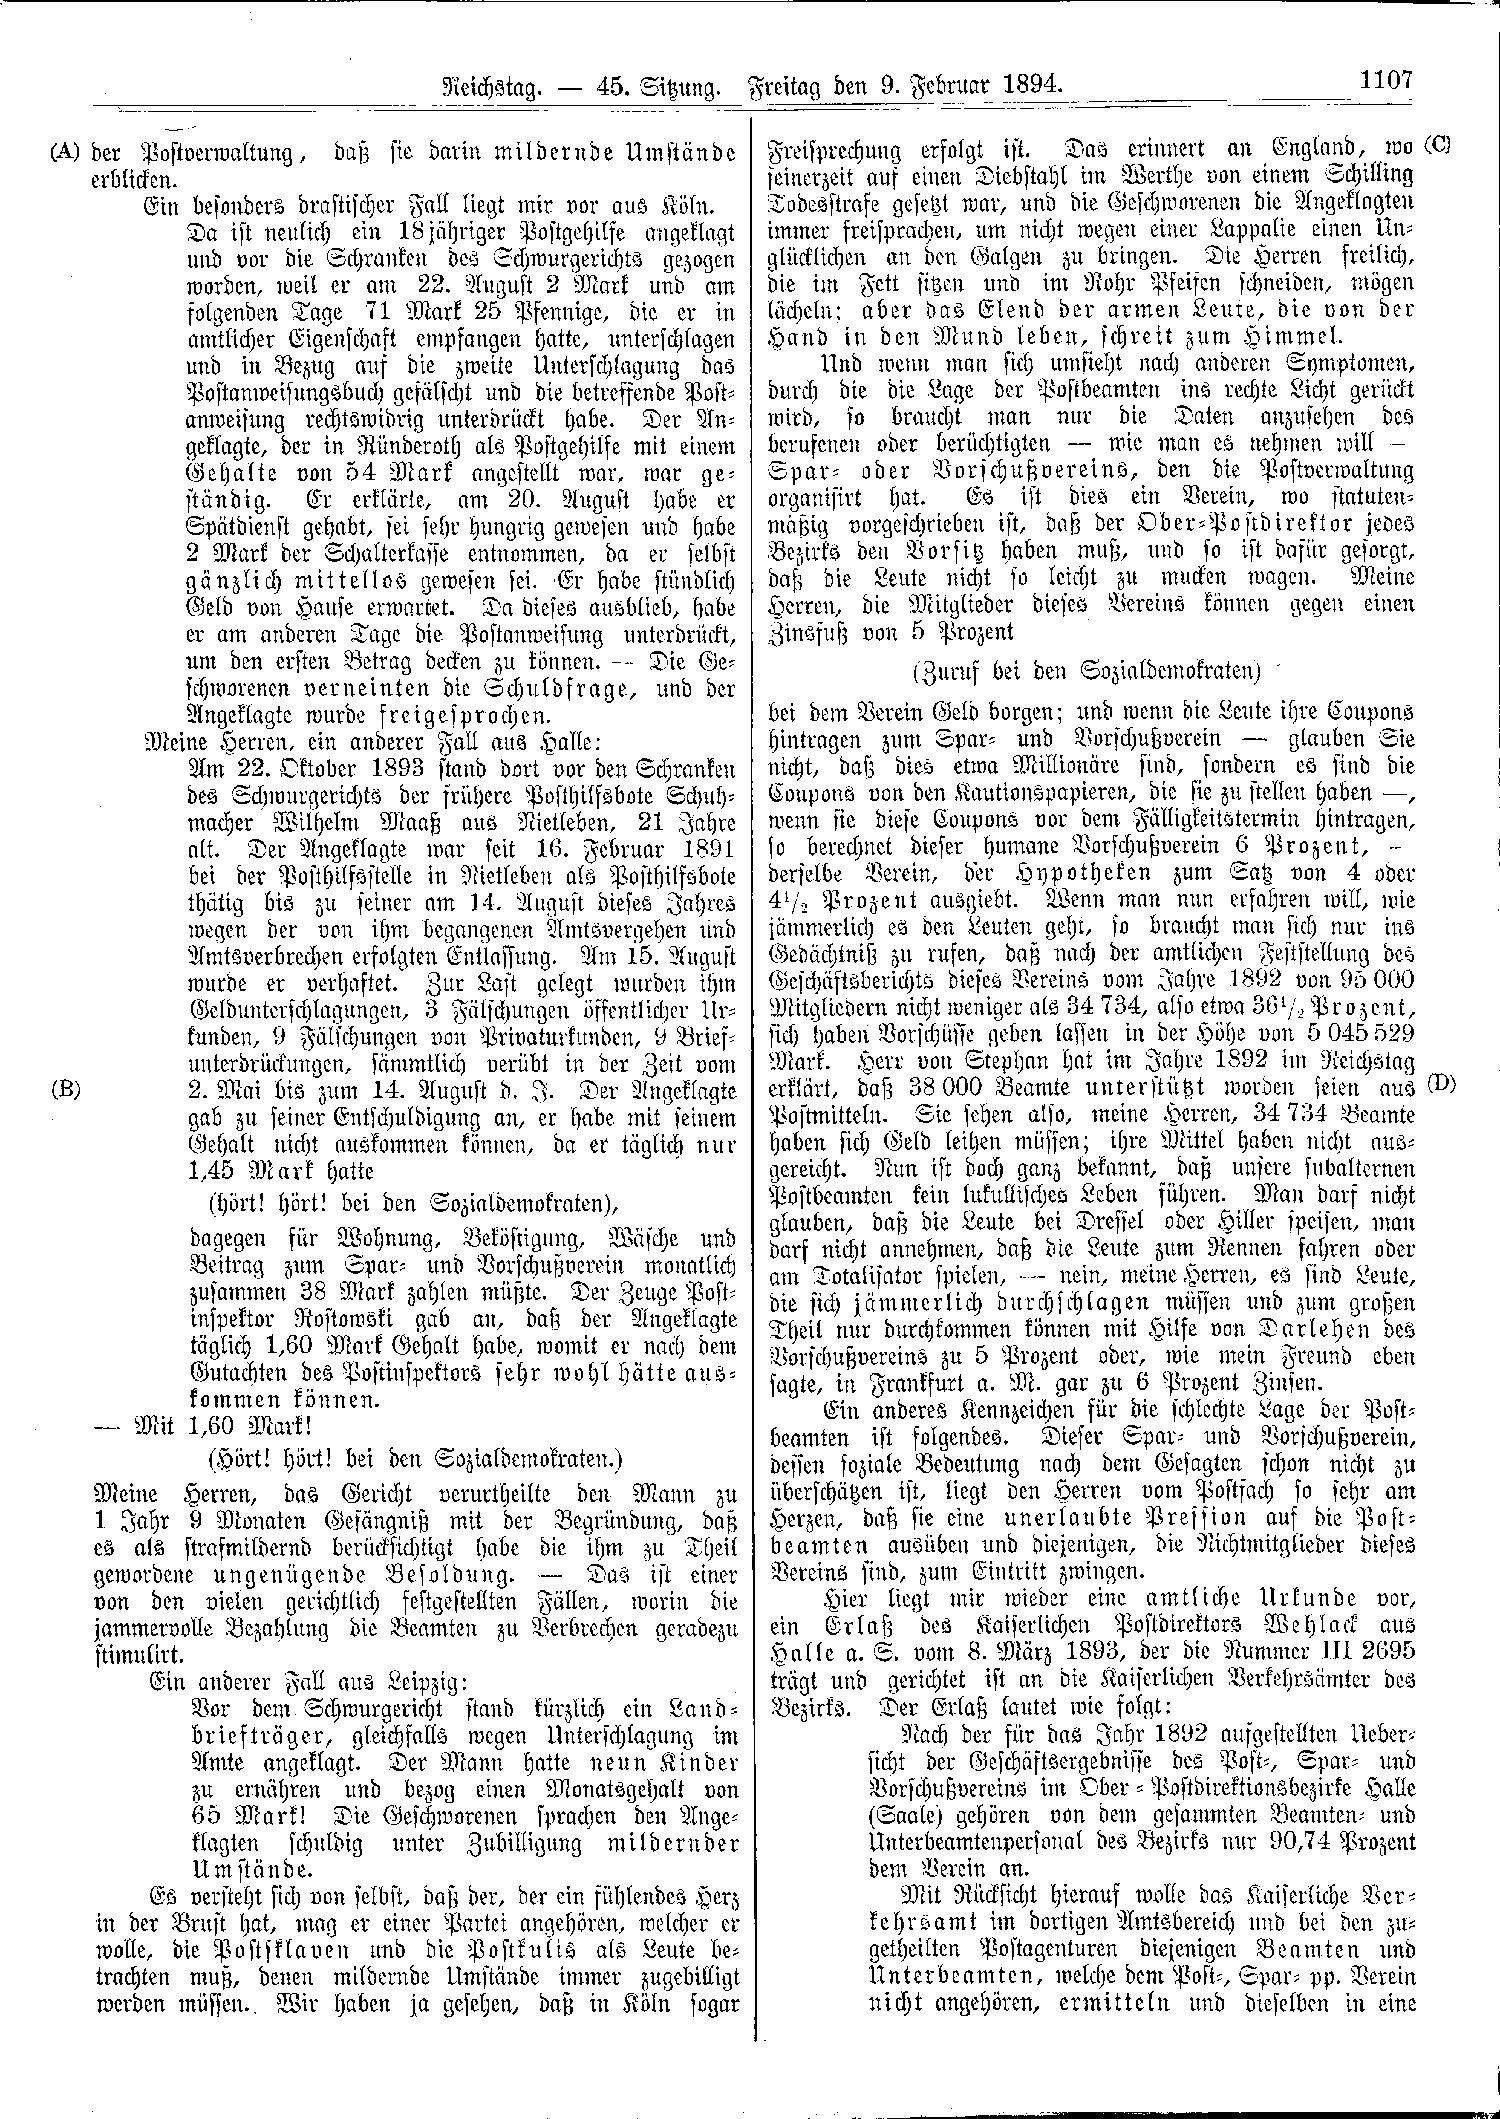 Scan of page 1107